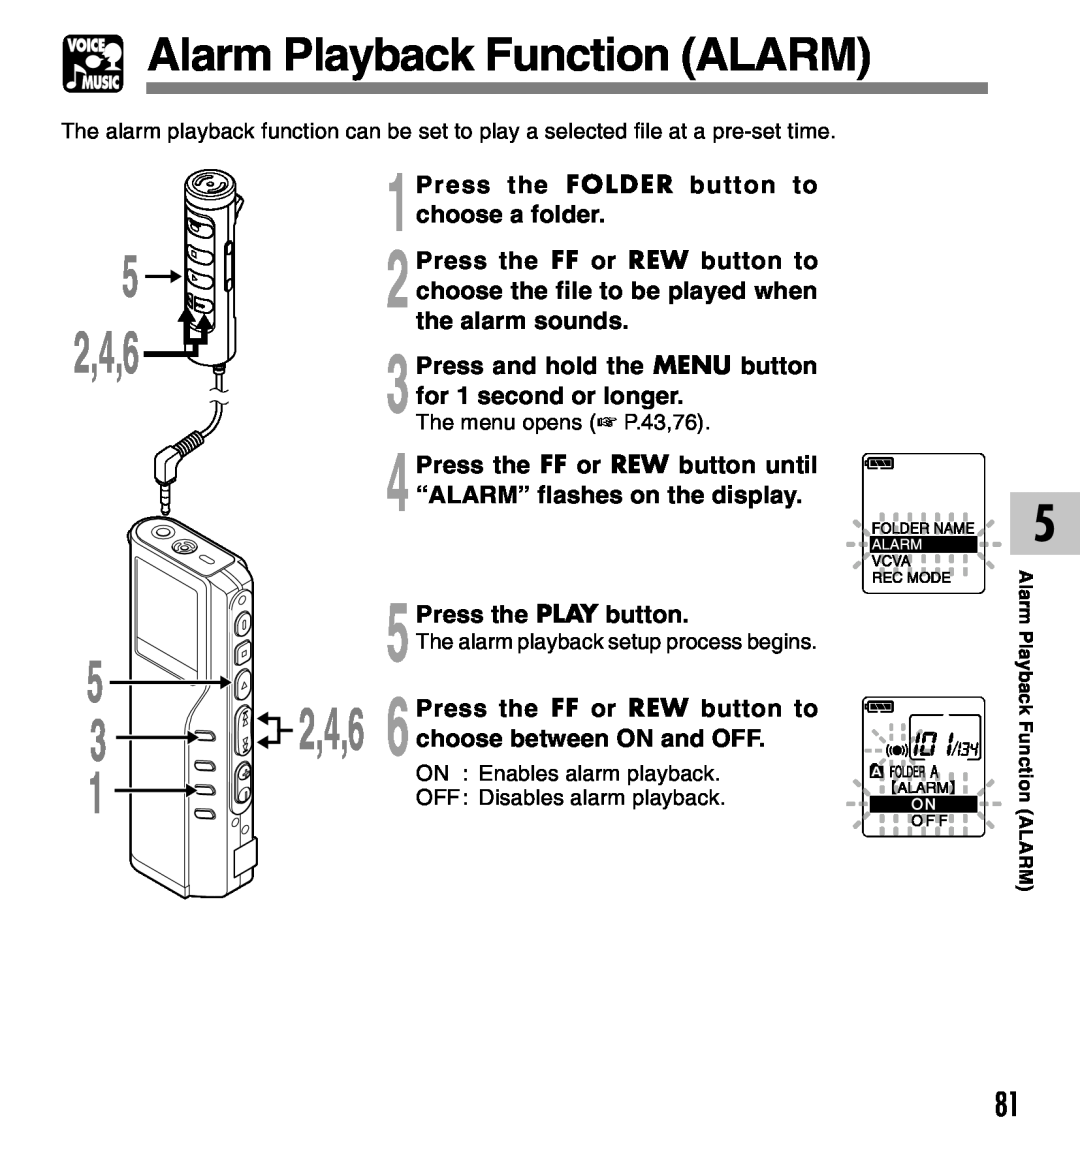 Olympus DM-20 Alarm Playback Function ALARM, 1choose a folder, 2choose the file to be played when, the alarm sounds, 2,4,6 